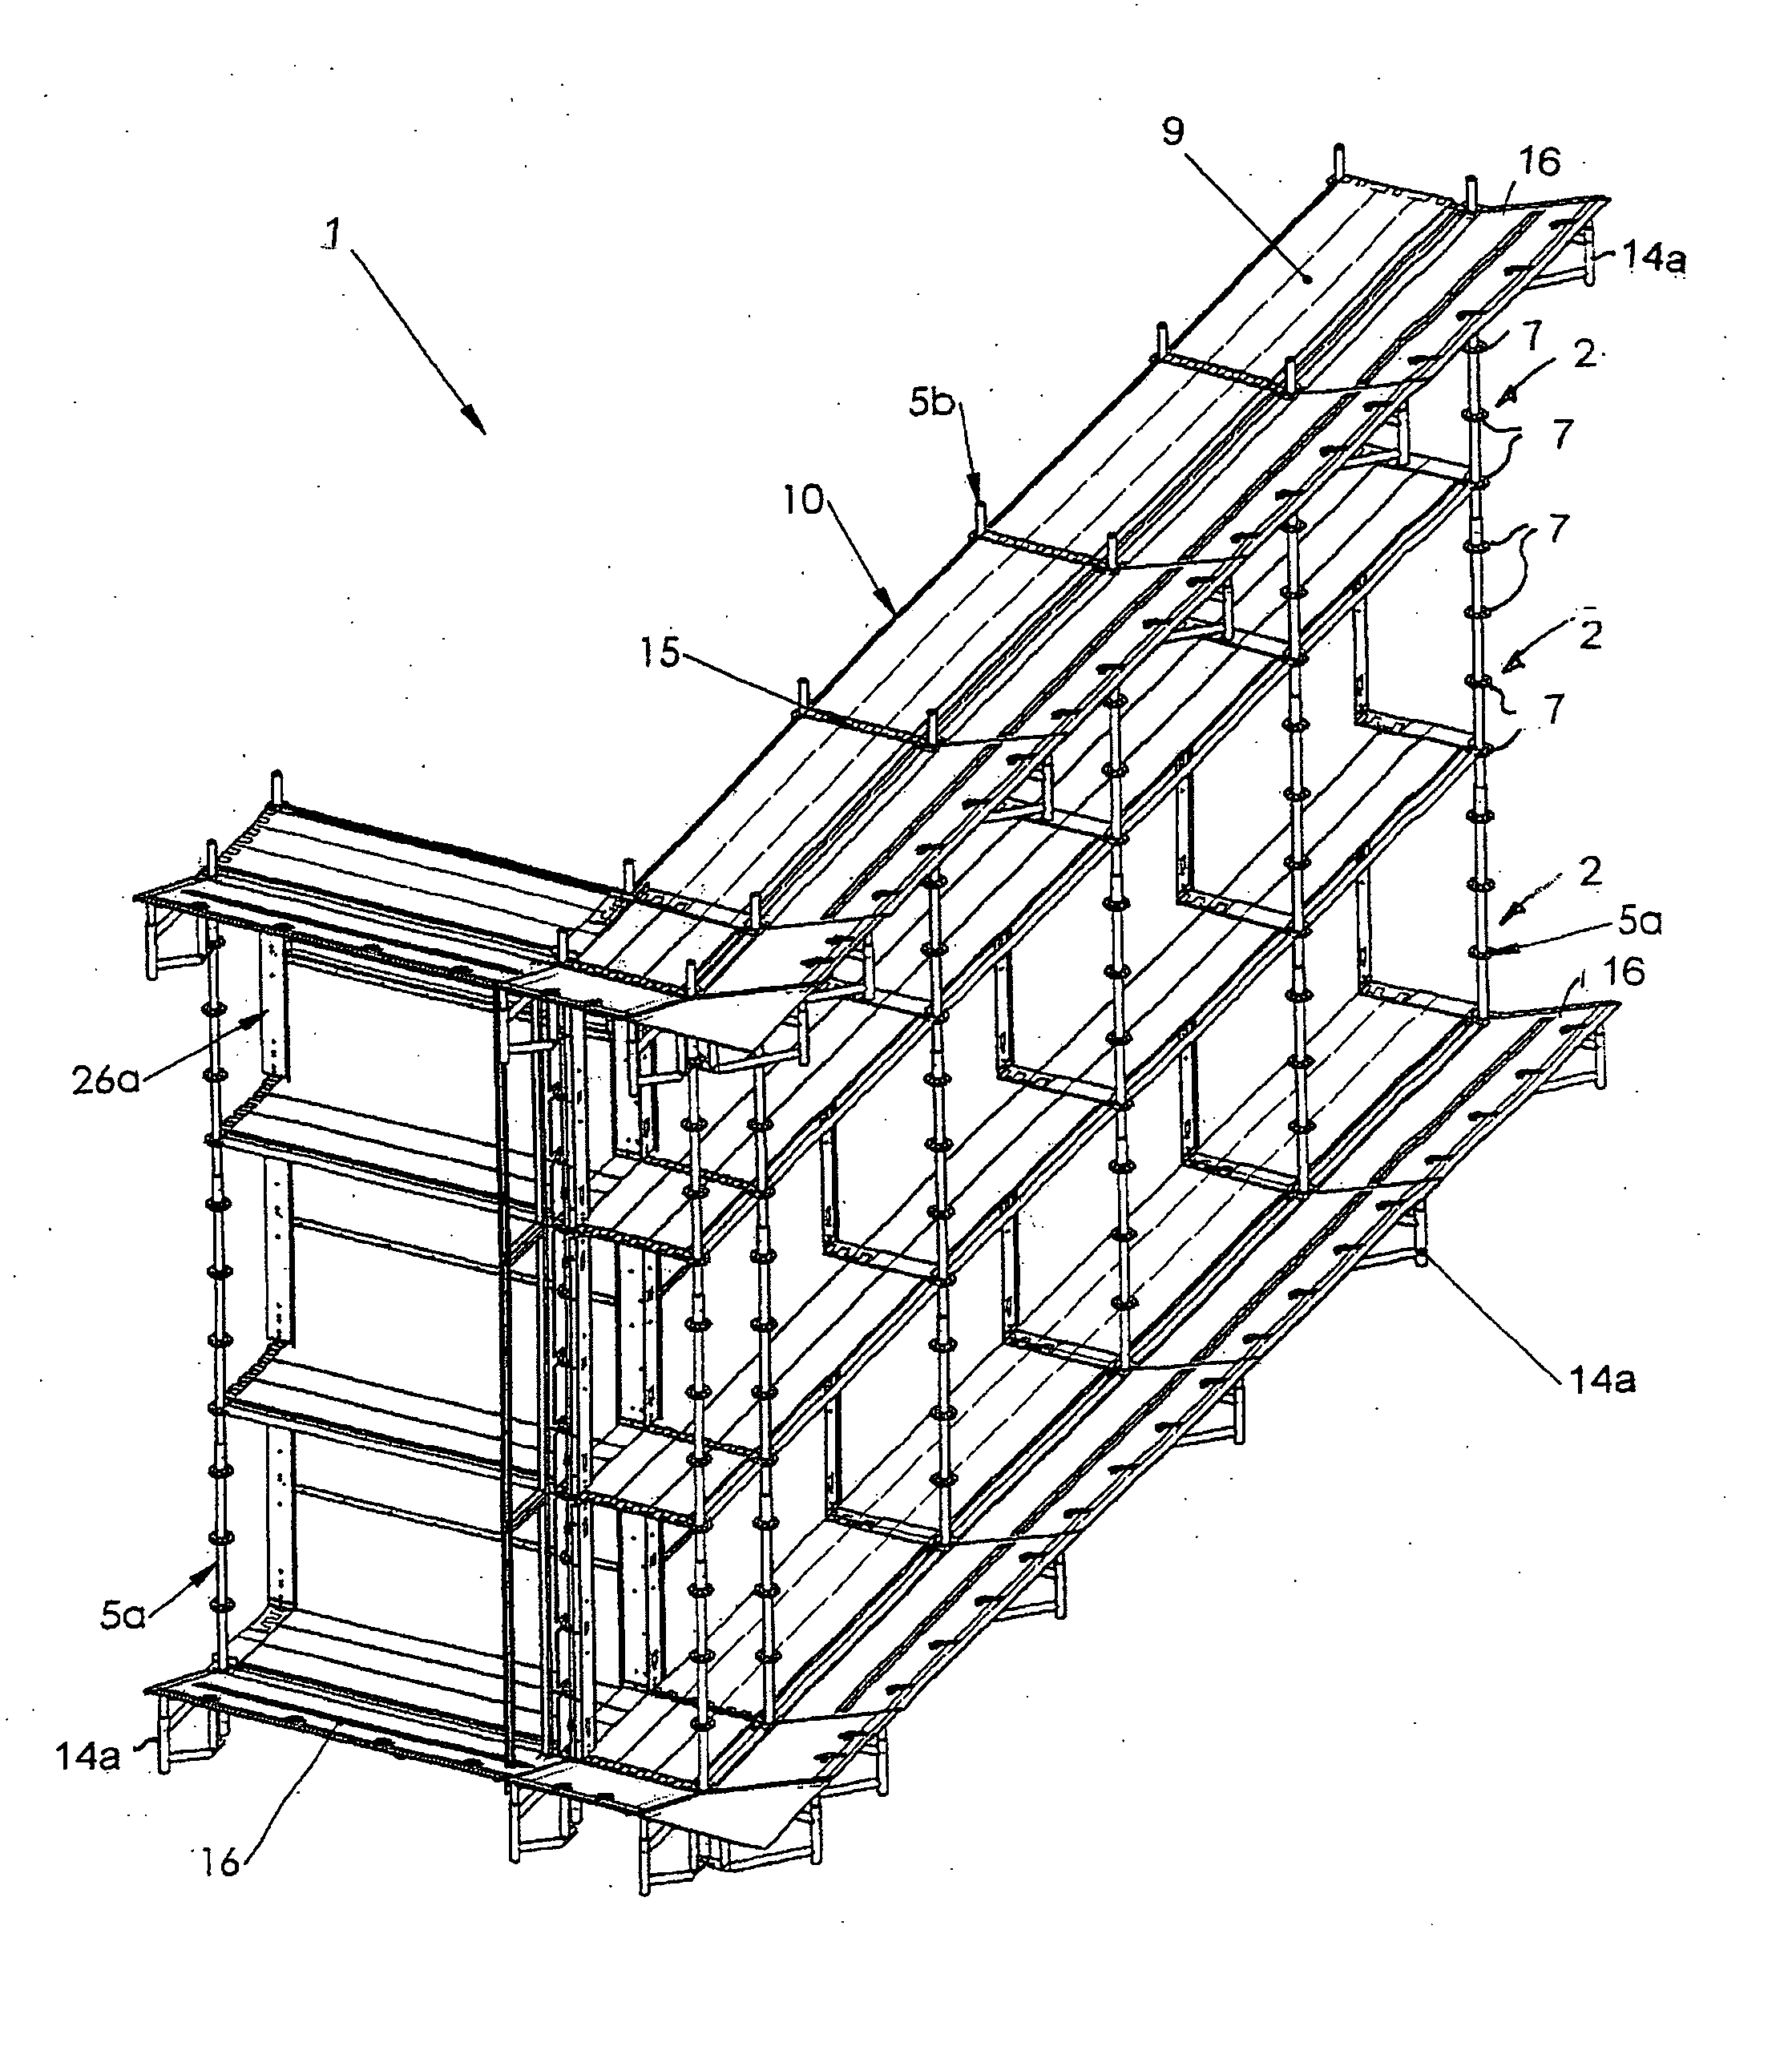 Enclosed scaffolding assembly